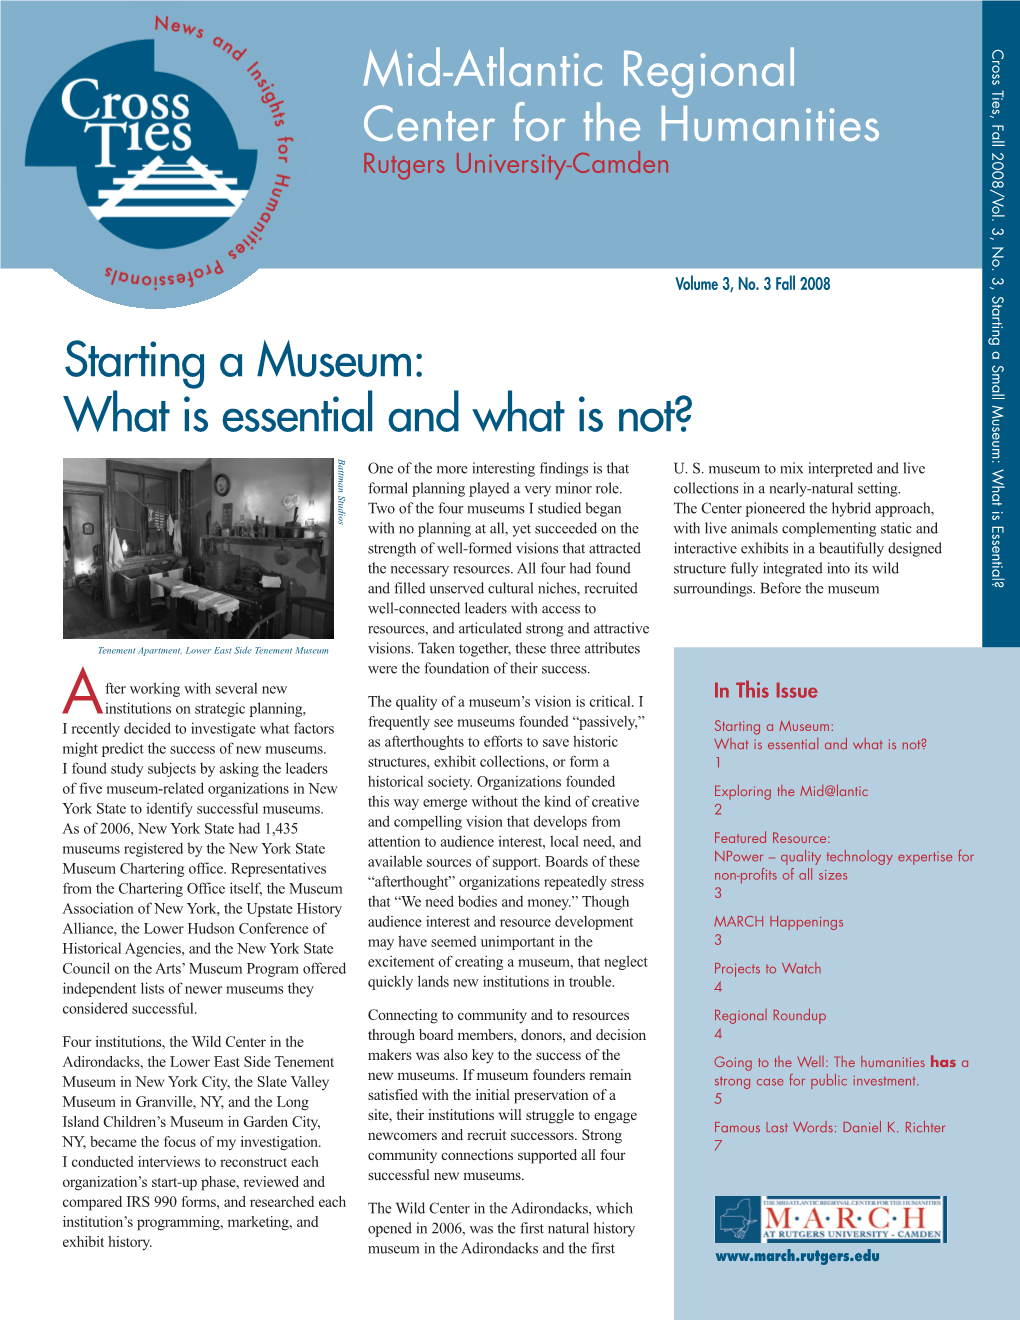 Mid-Atlantic Regional Center for the Humanities Starting a Museum